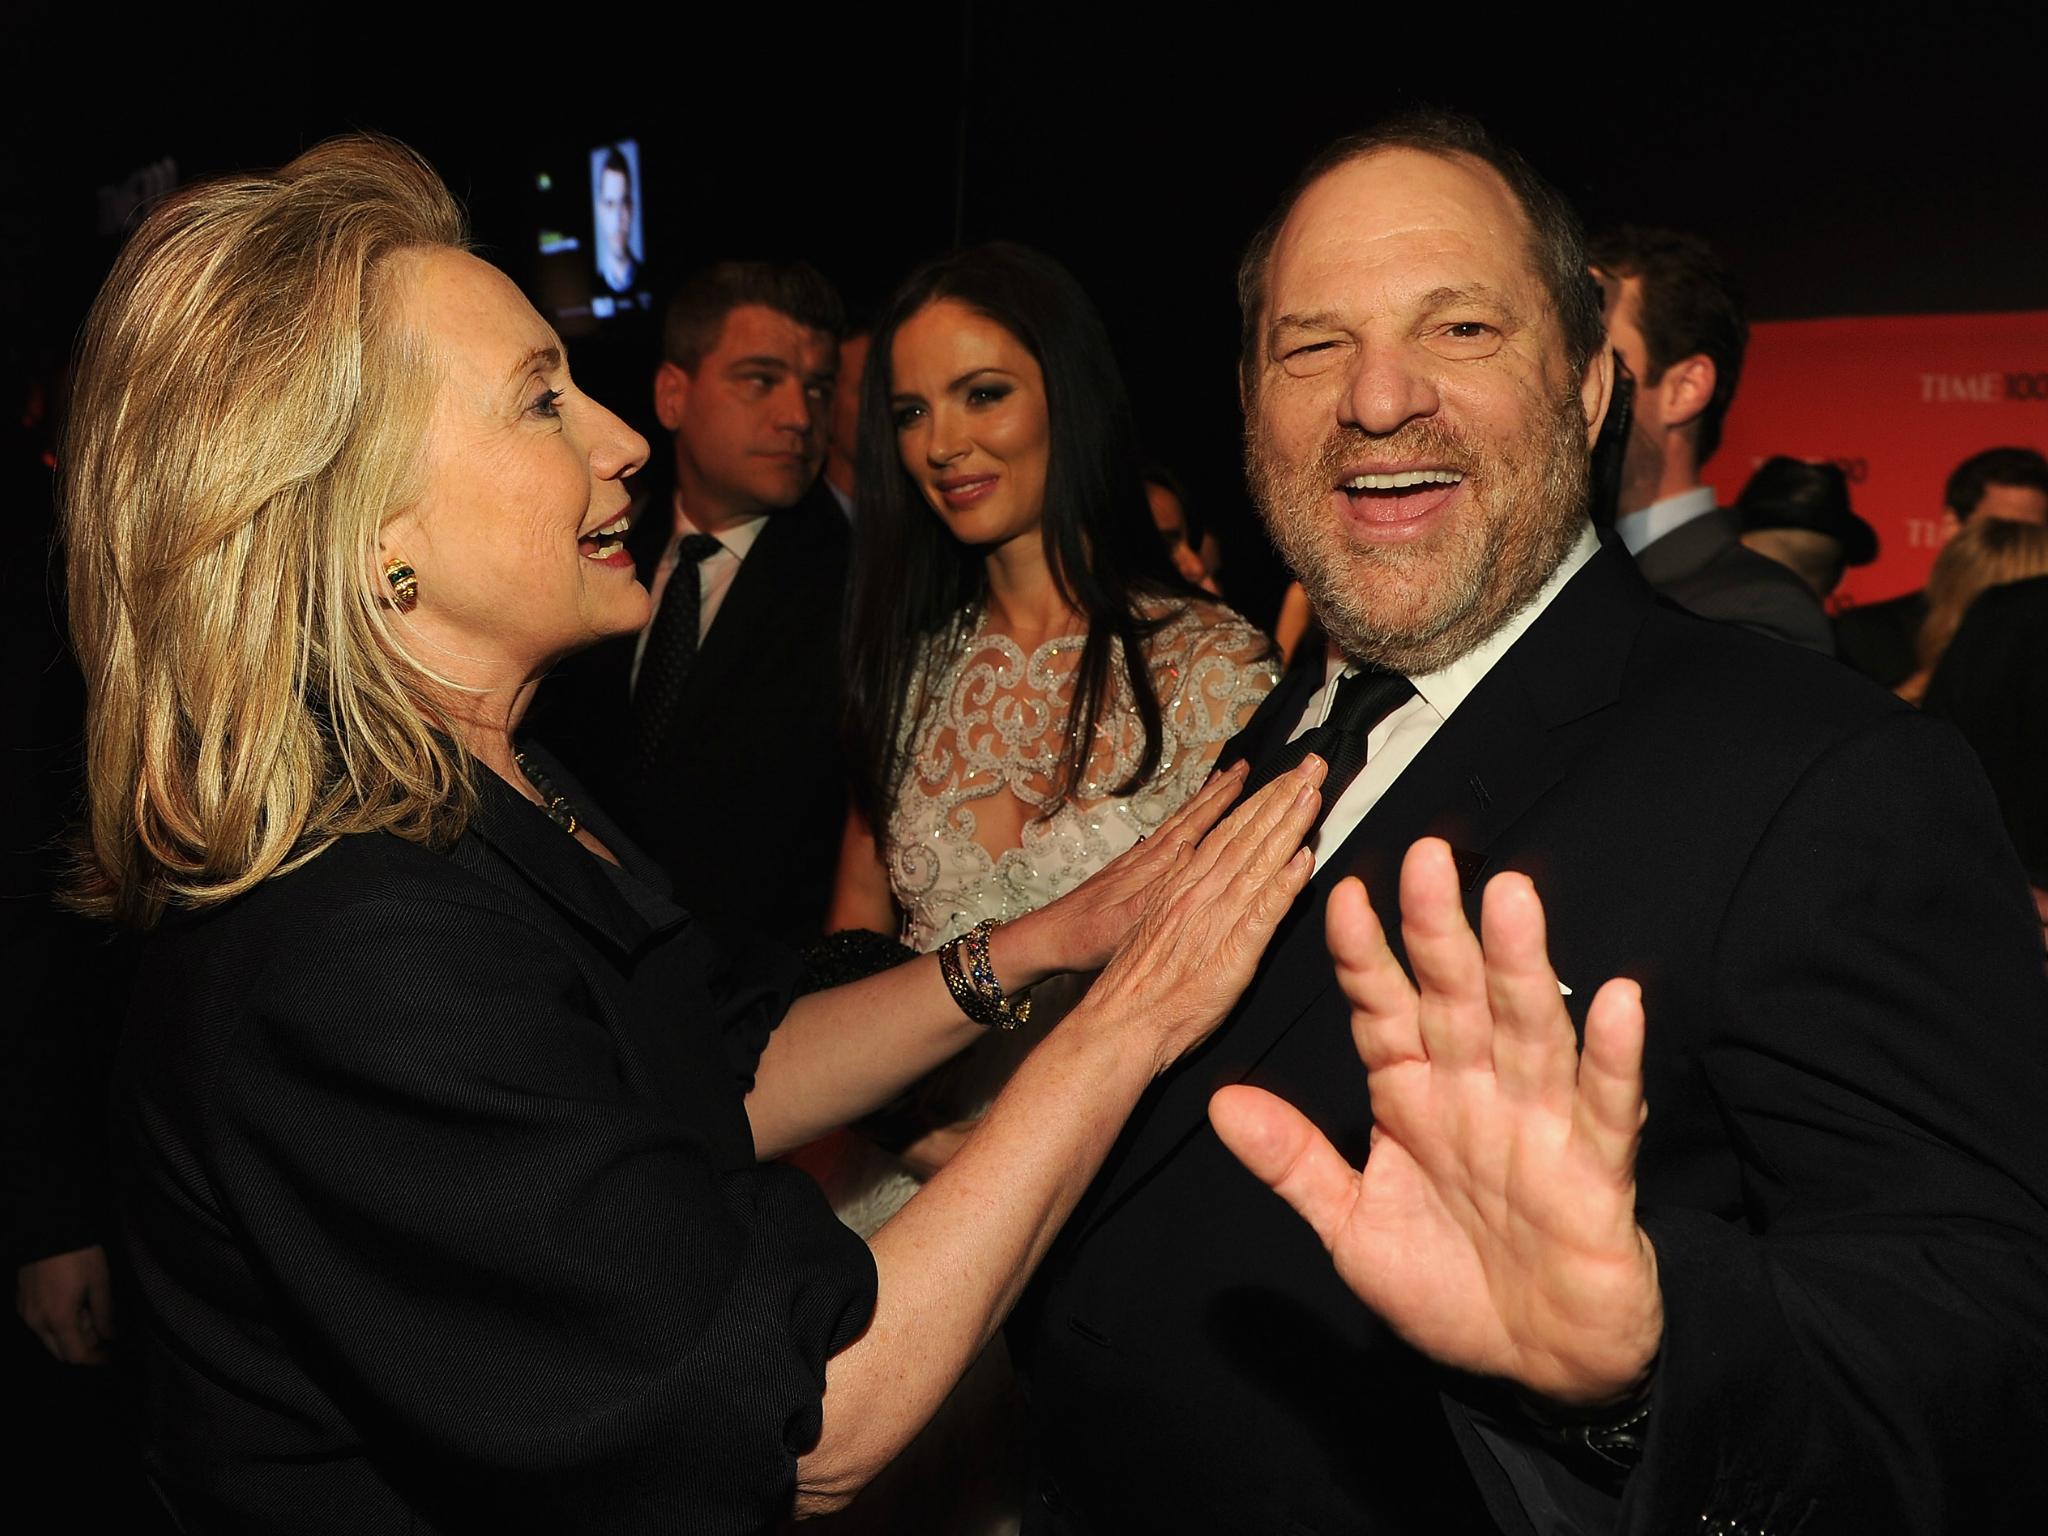 Hillary clinton response to claims of sexual harassment against Harvey Weinstein, a frequent donor to Democratic candidates